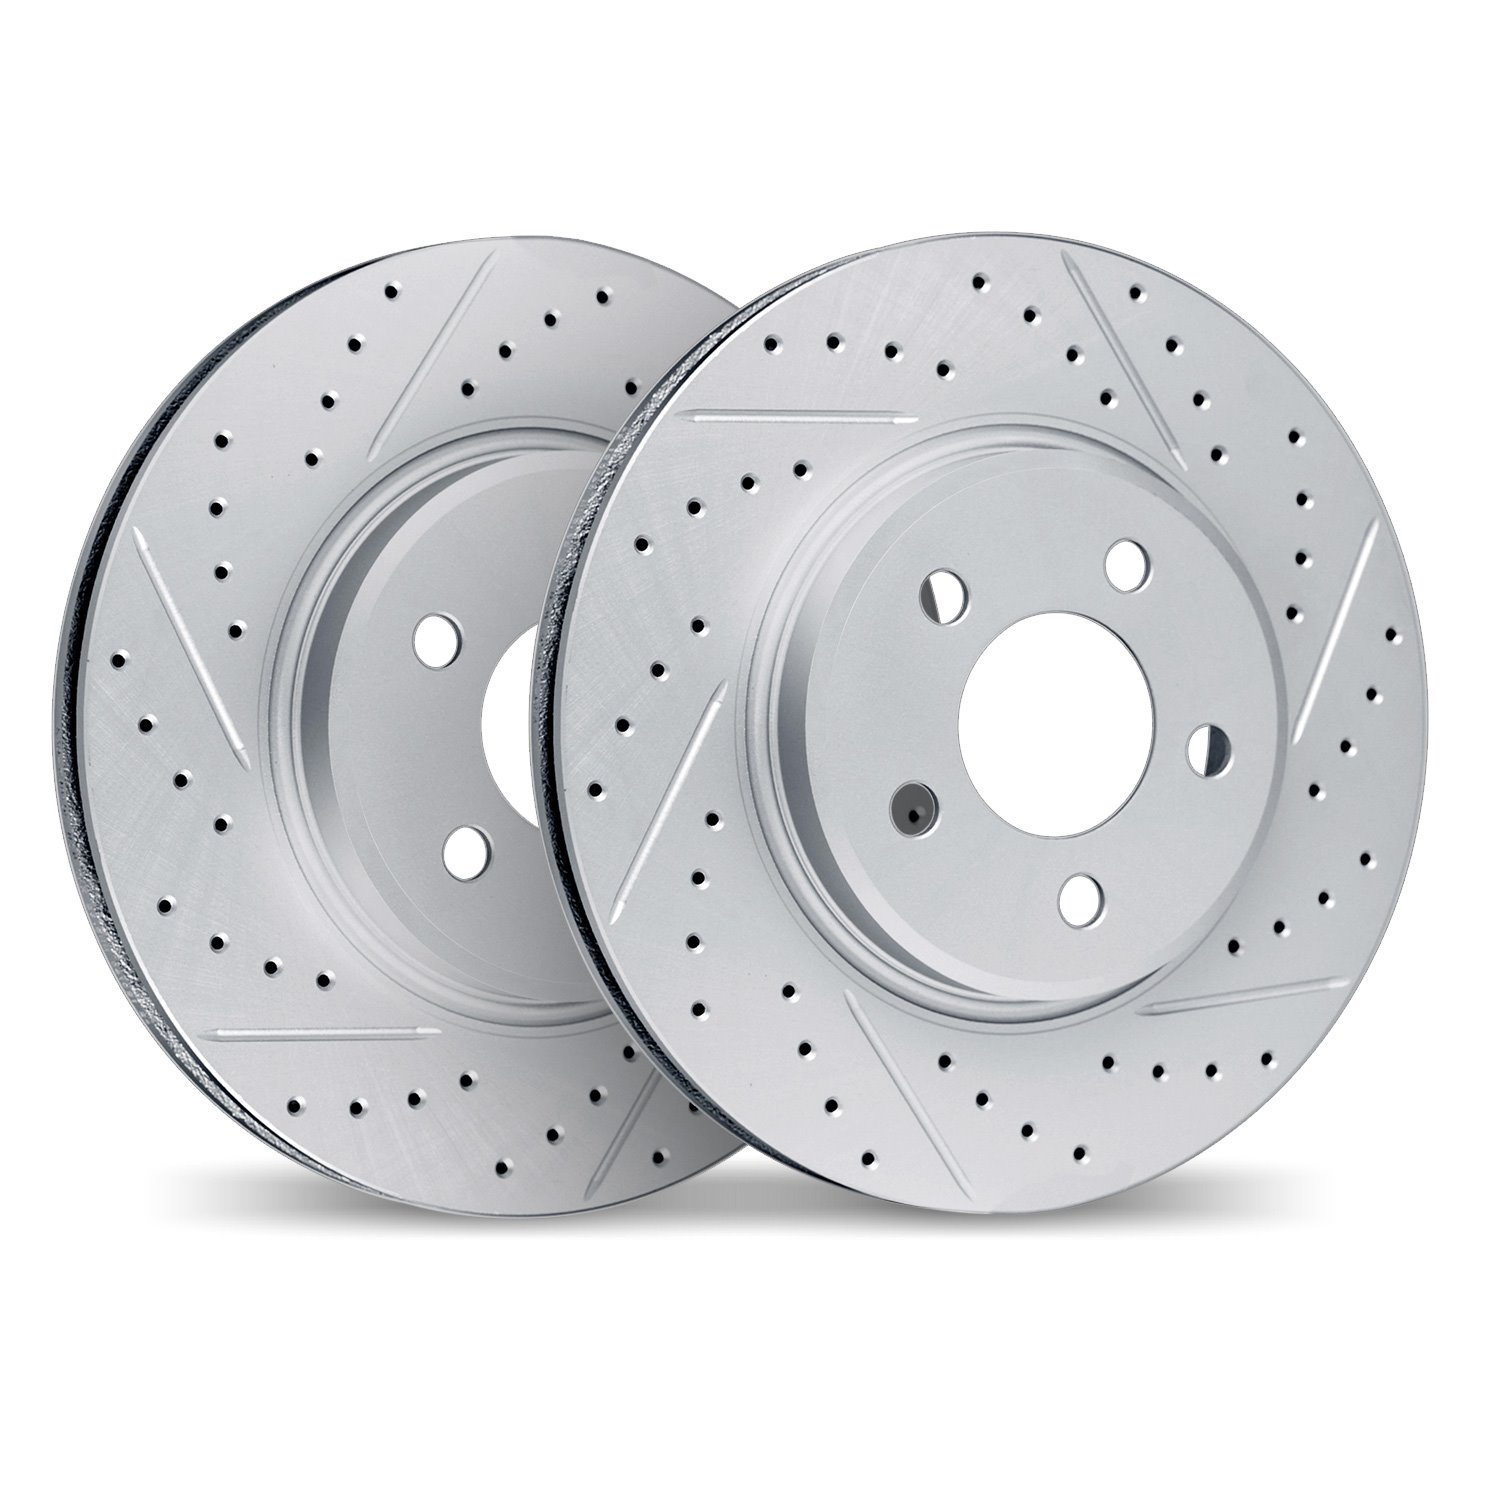 2002-54117 Geoperformance Drilled/Slotted Brake Rotors, 2017-2020 Ford/Lincoln/Mercury/Mazda, Position: Front